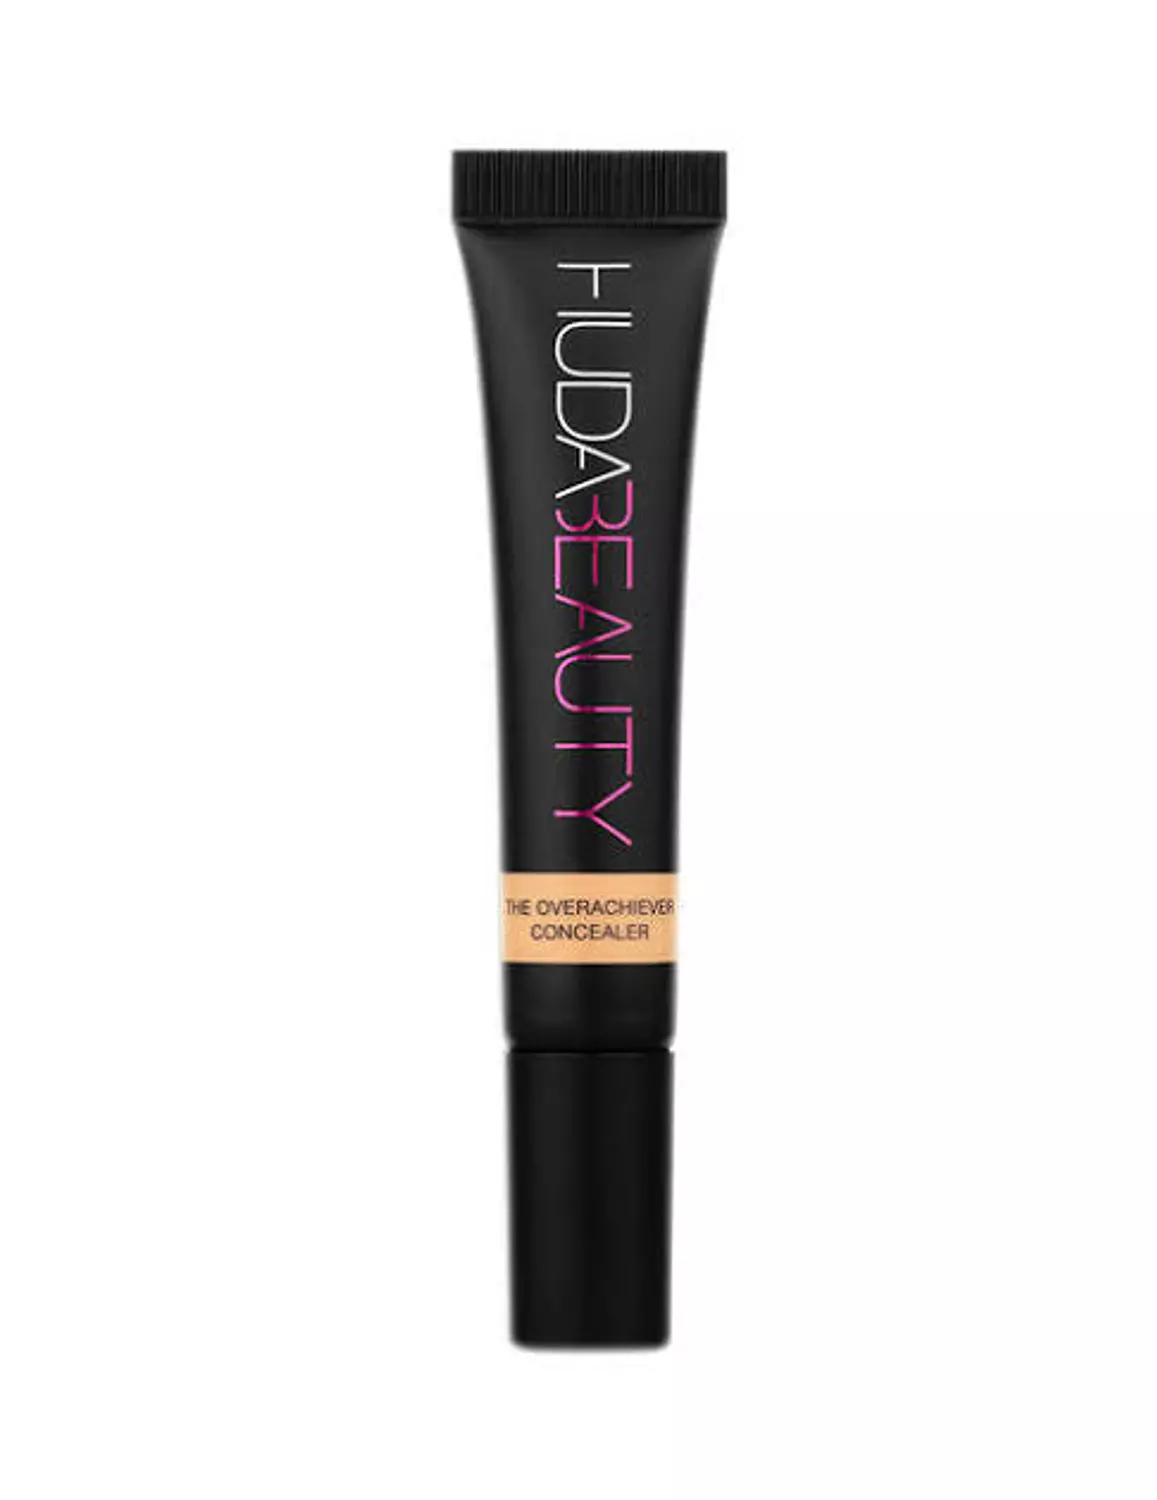 THE OVERACHEIVER CONCEALER | HUDA BEAUTY hover image